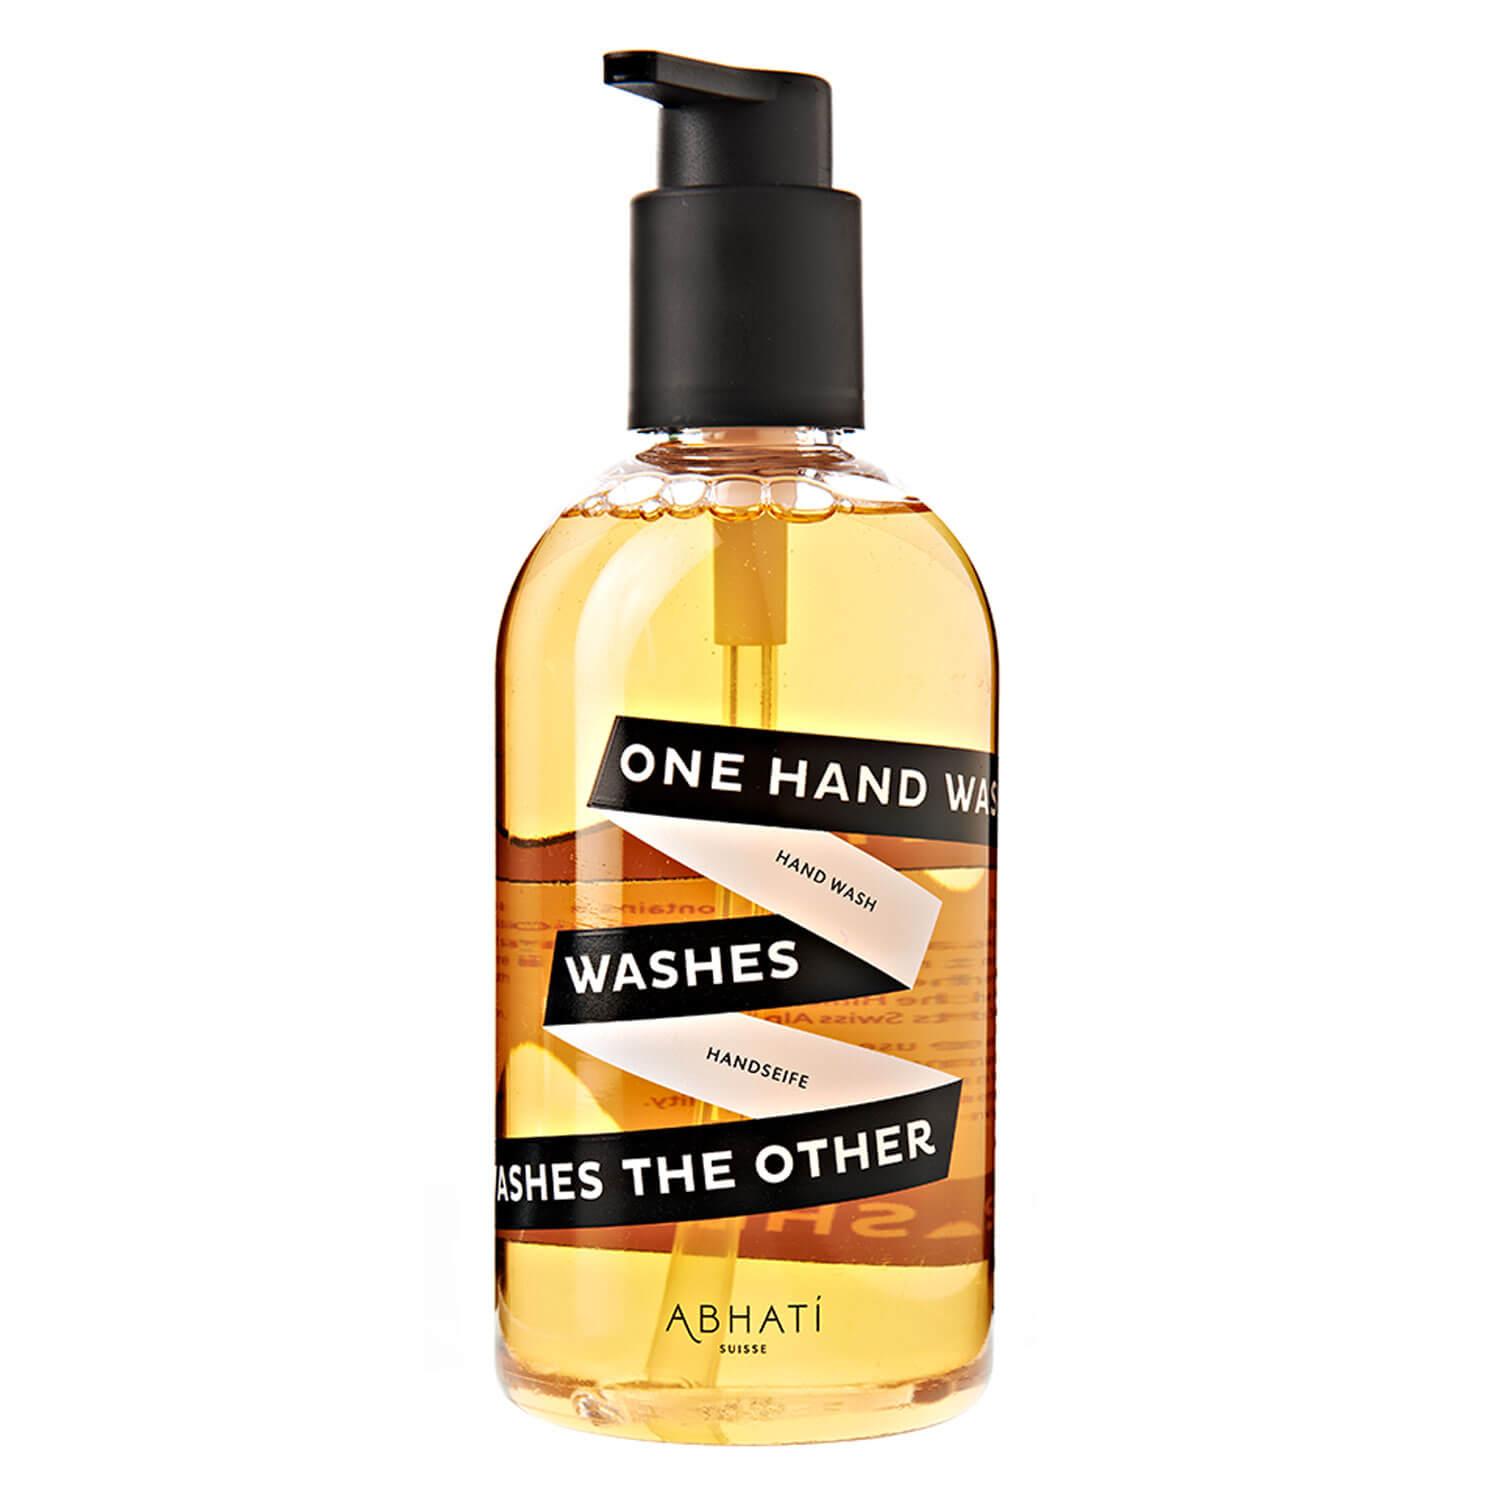 ABHATI Suisse - One Hand Washes The Other Hand Soap